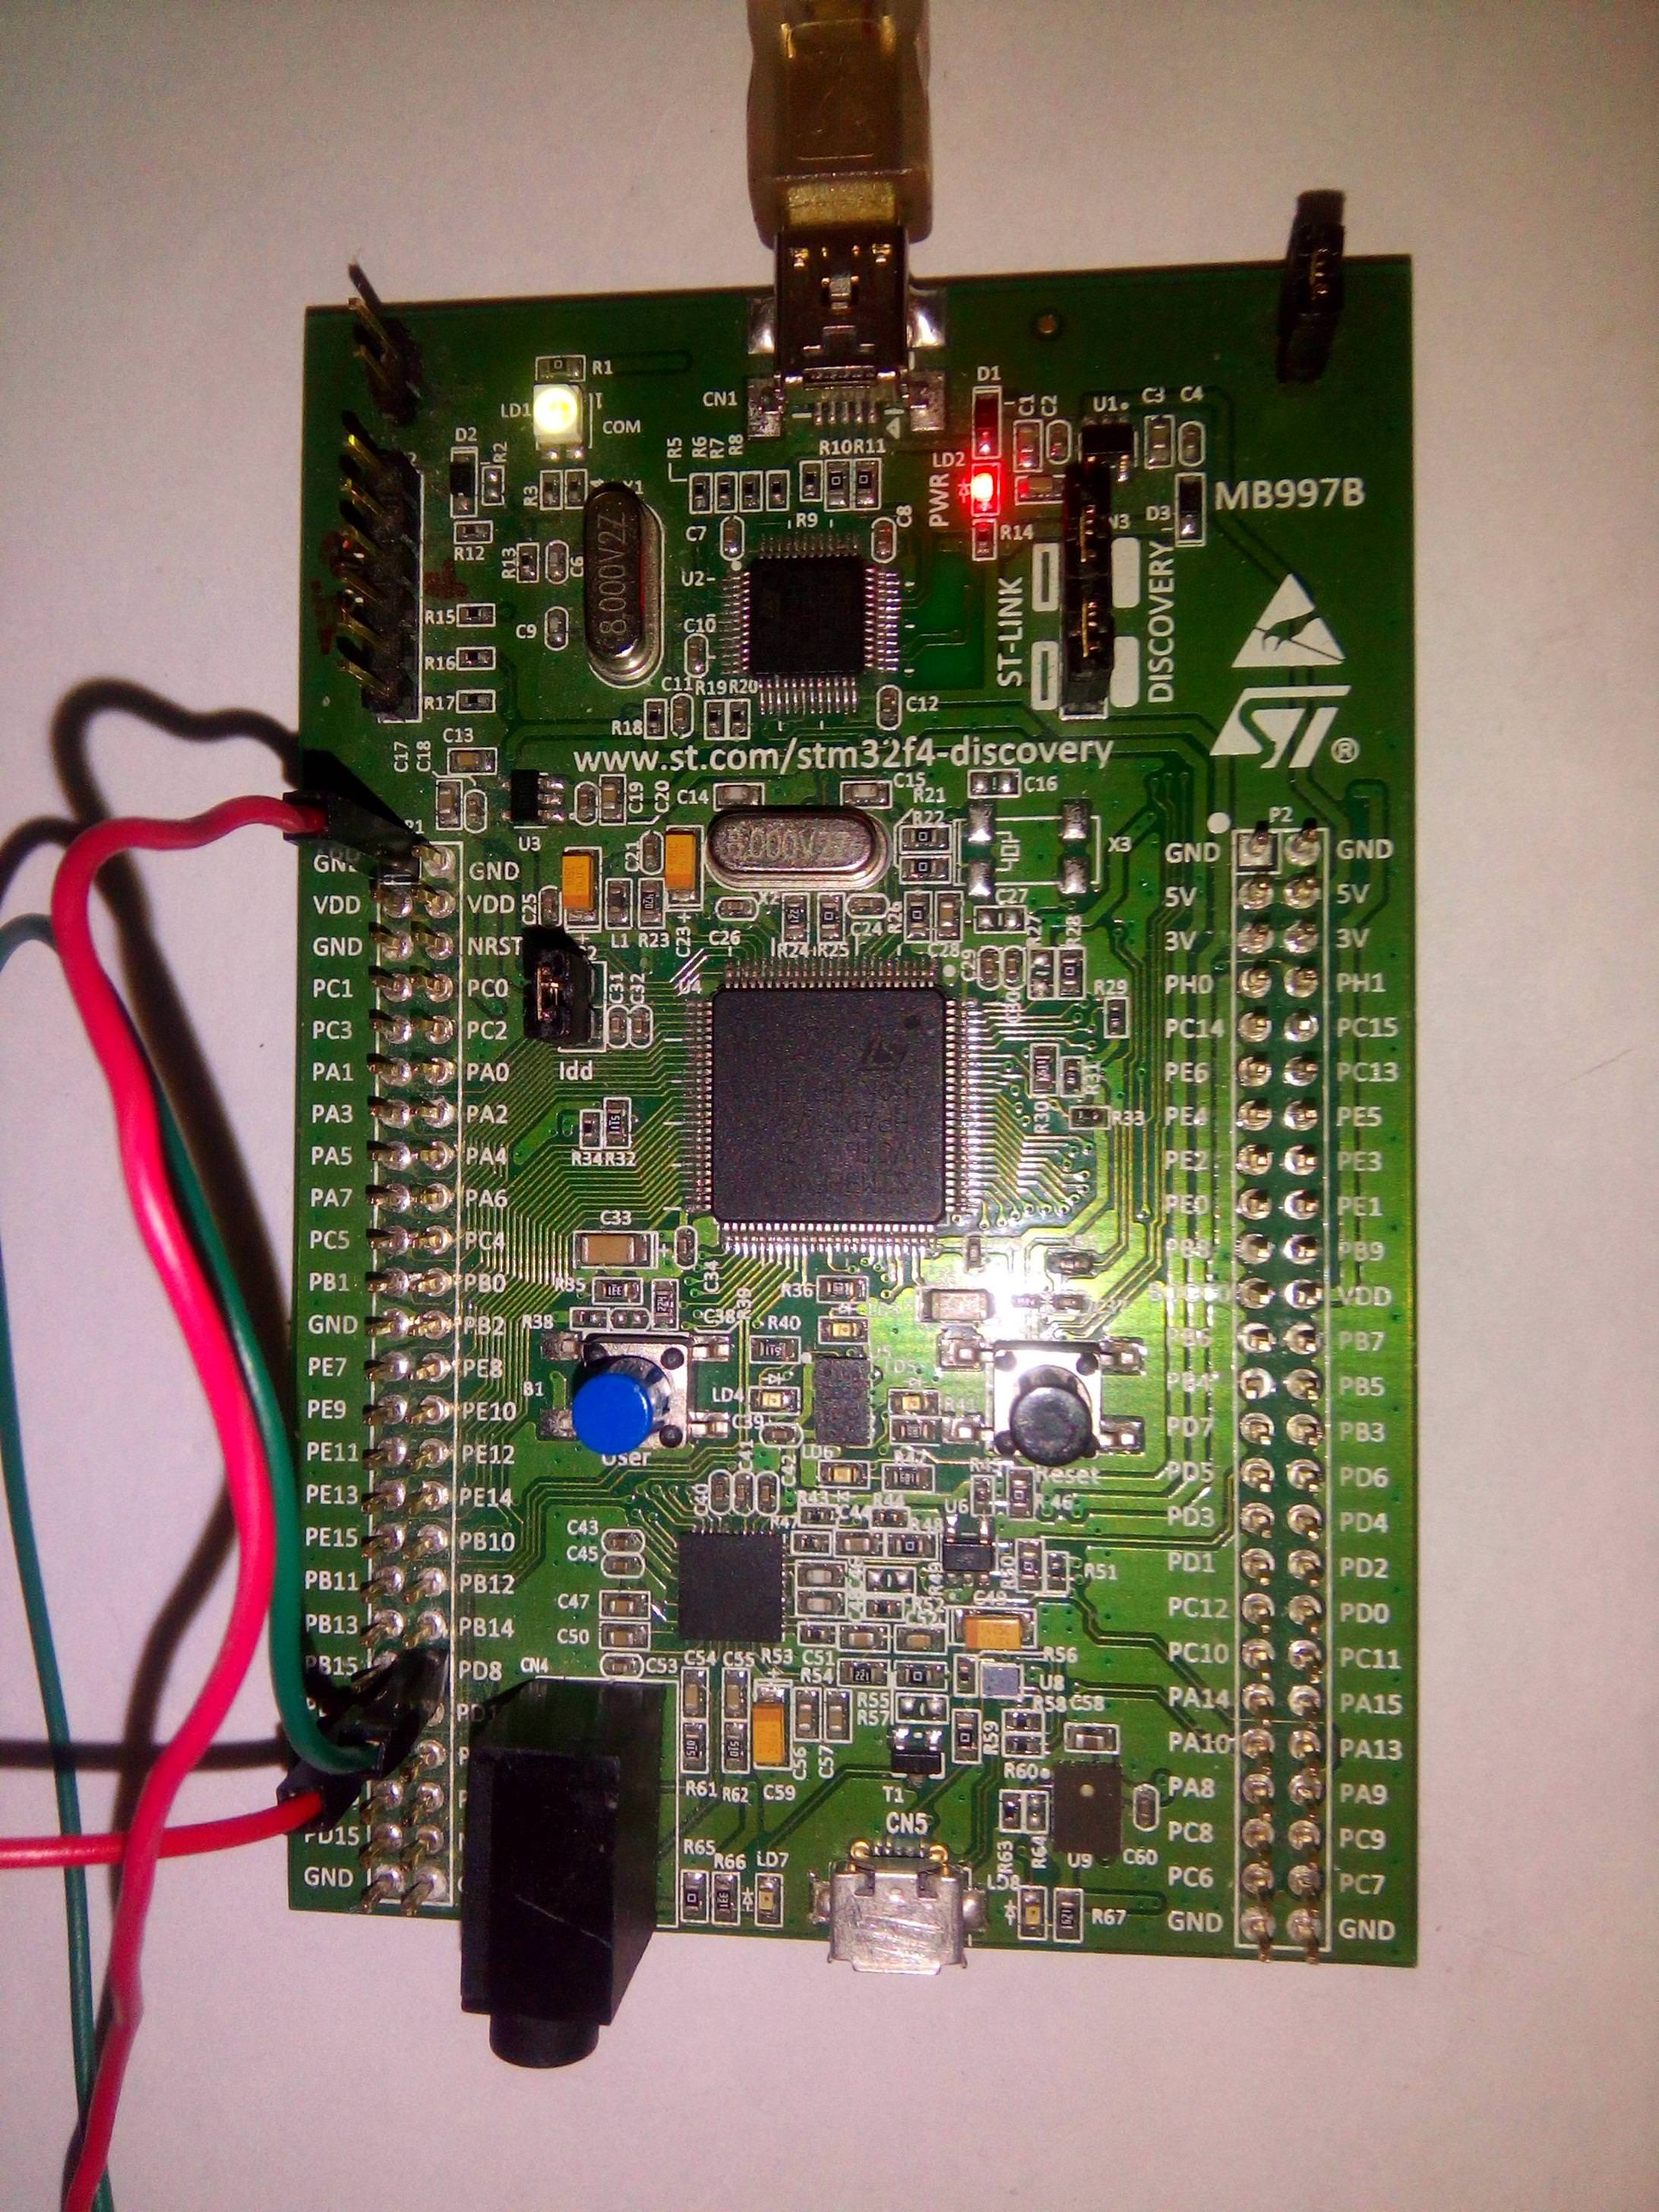 UART wiring for stm32f4discovery EXTI example